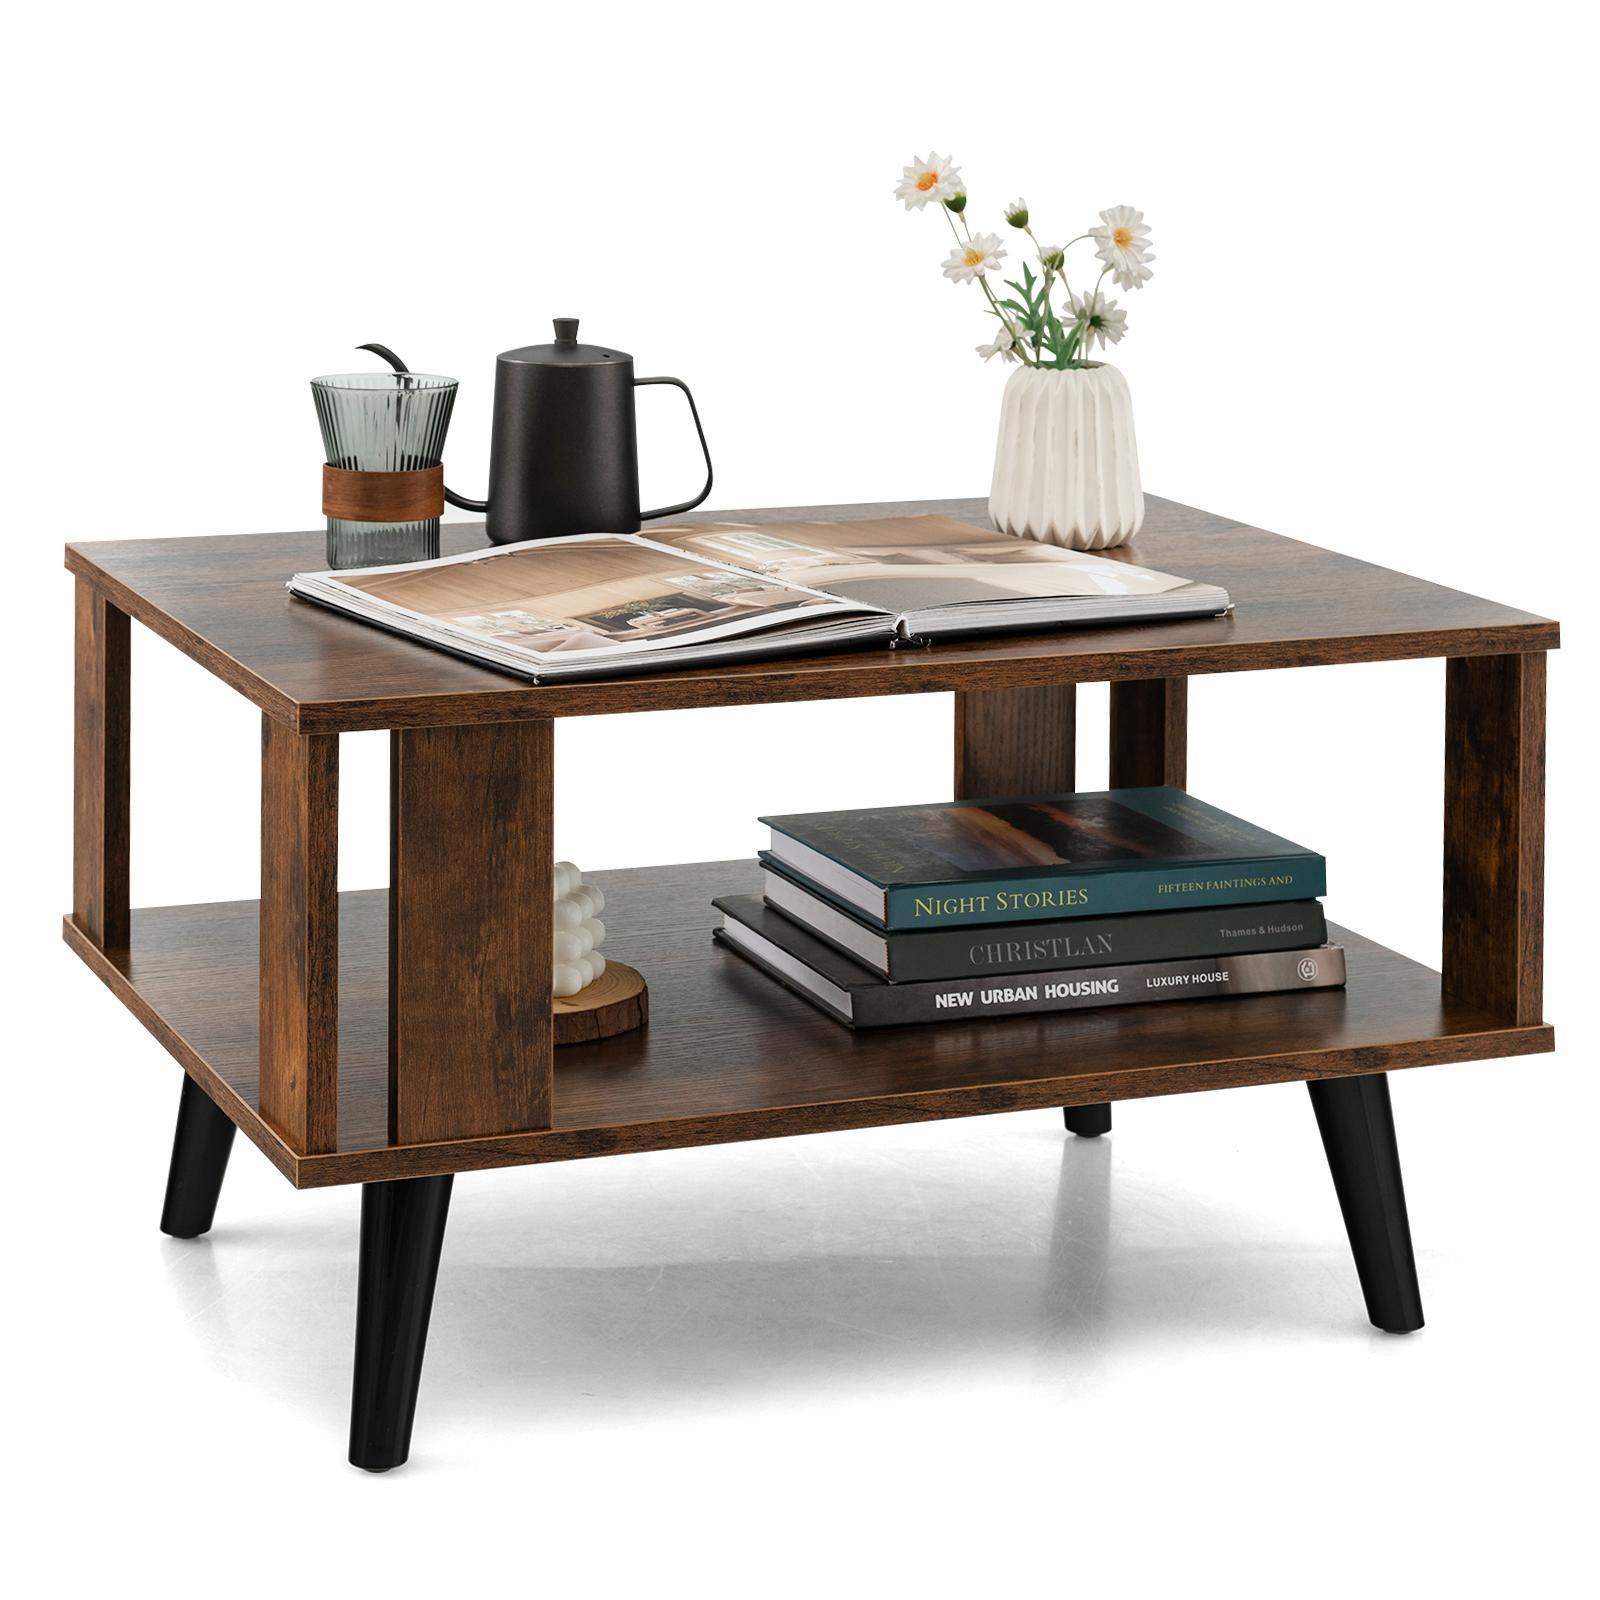 Giantex 2-Tier Coffee Table Wood Center Table Open Storage Shelf Industrial Side Table Rustic Brown